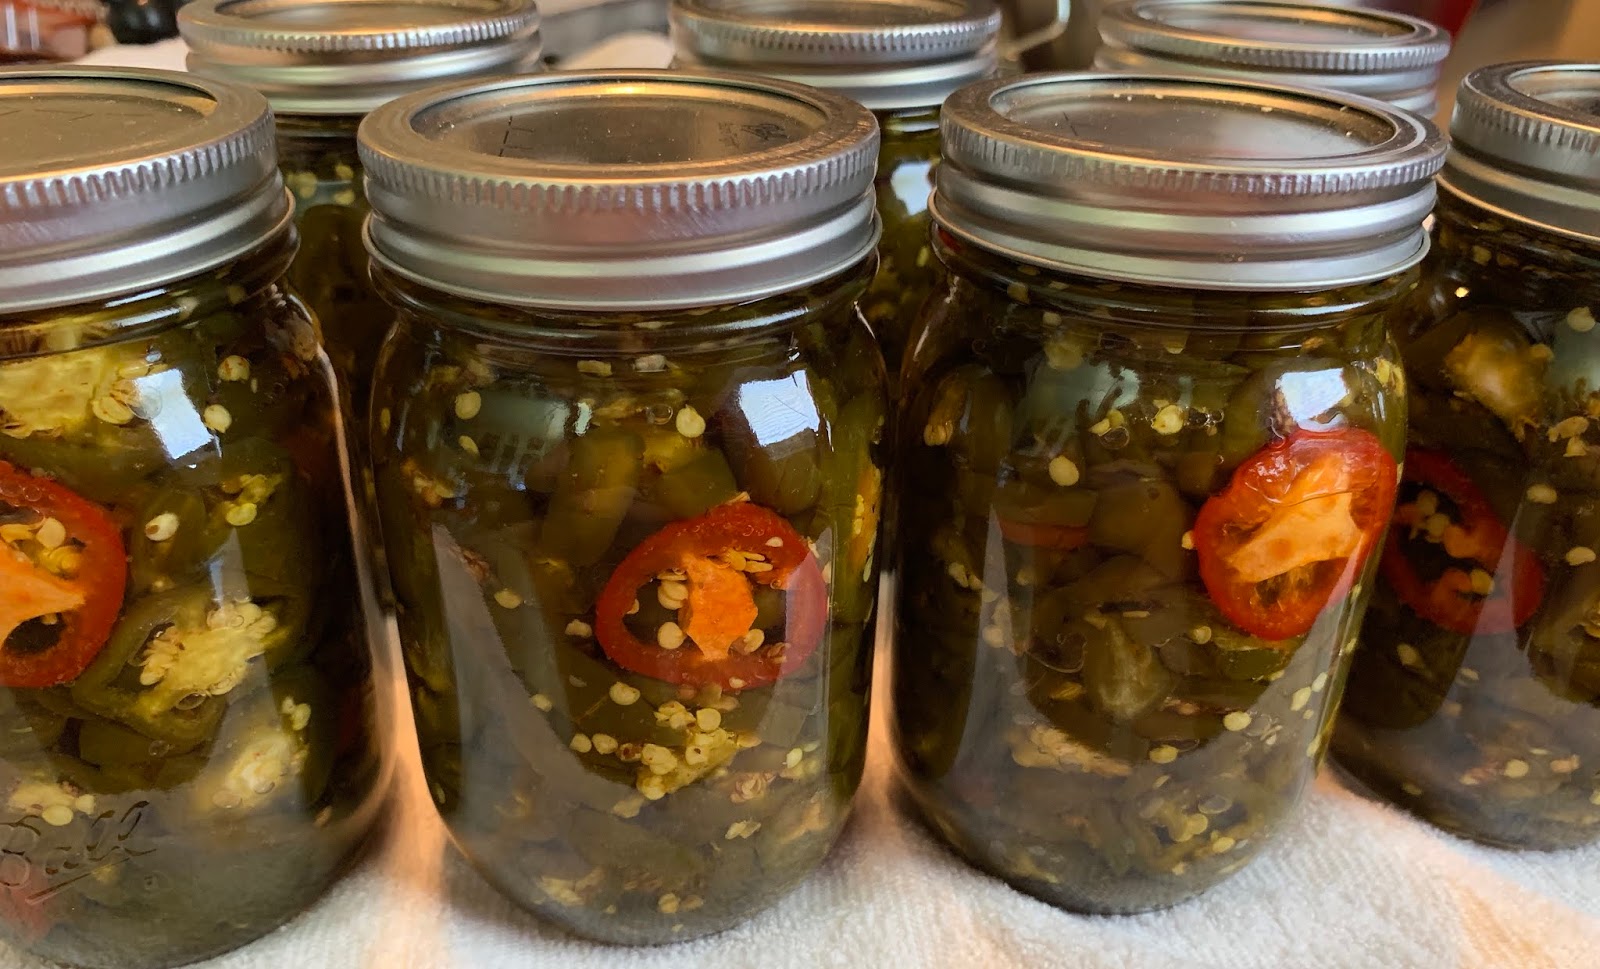 Candied Jalapenos a.k.a. Cowboy Candy or Sweet Pickled Jalapeños